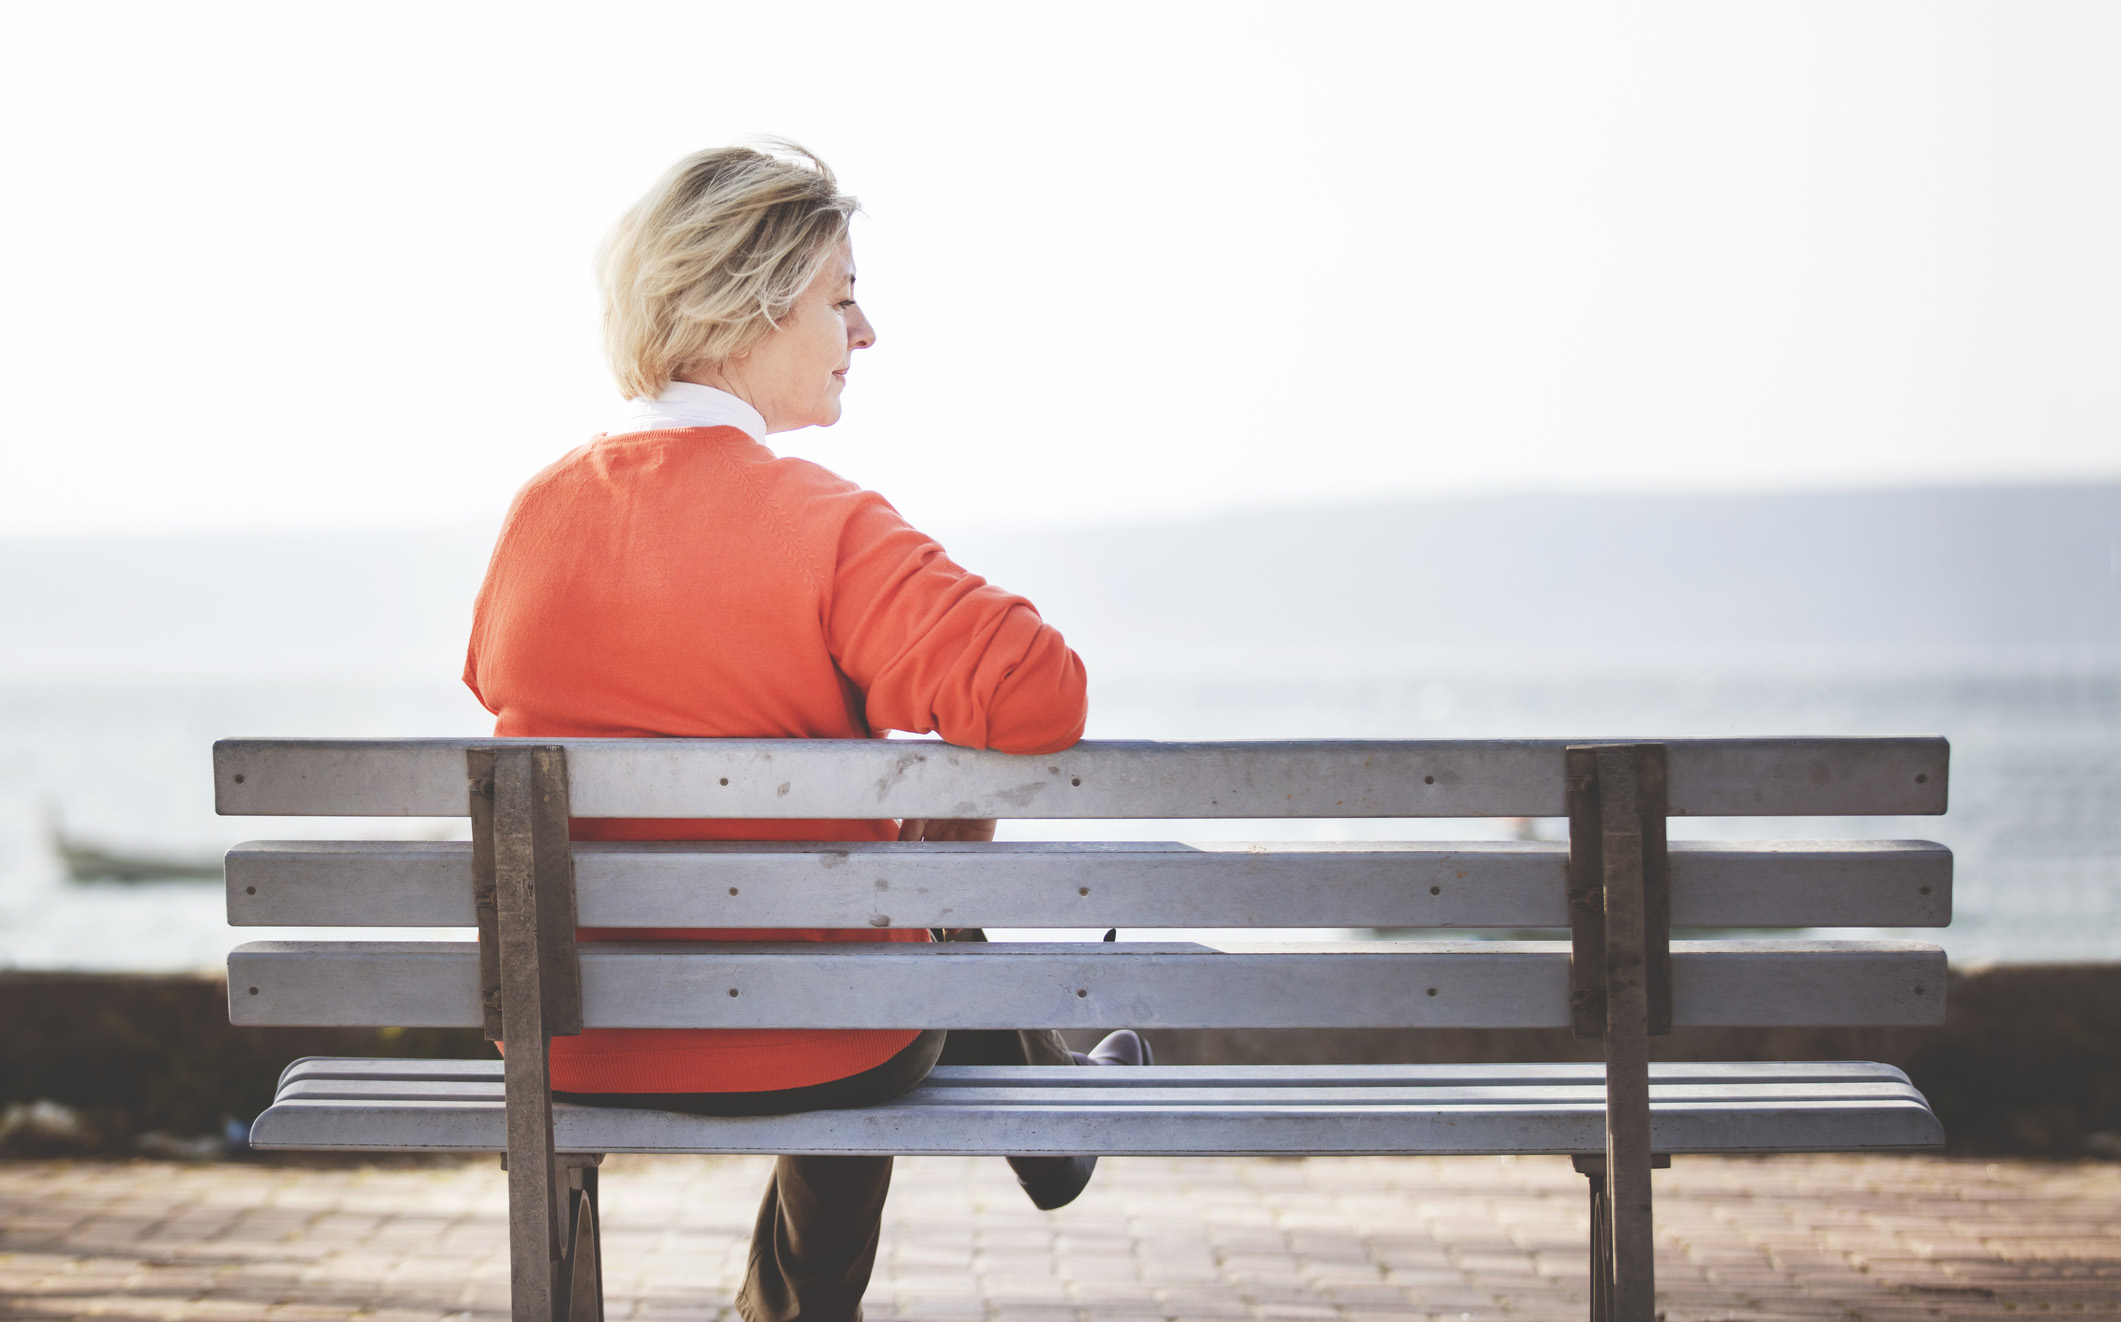 Woman with light hair and orange sweater sits alone on a bench overlooking water